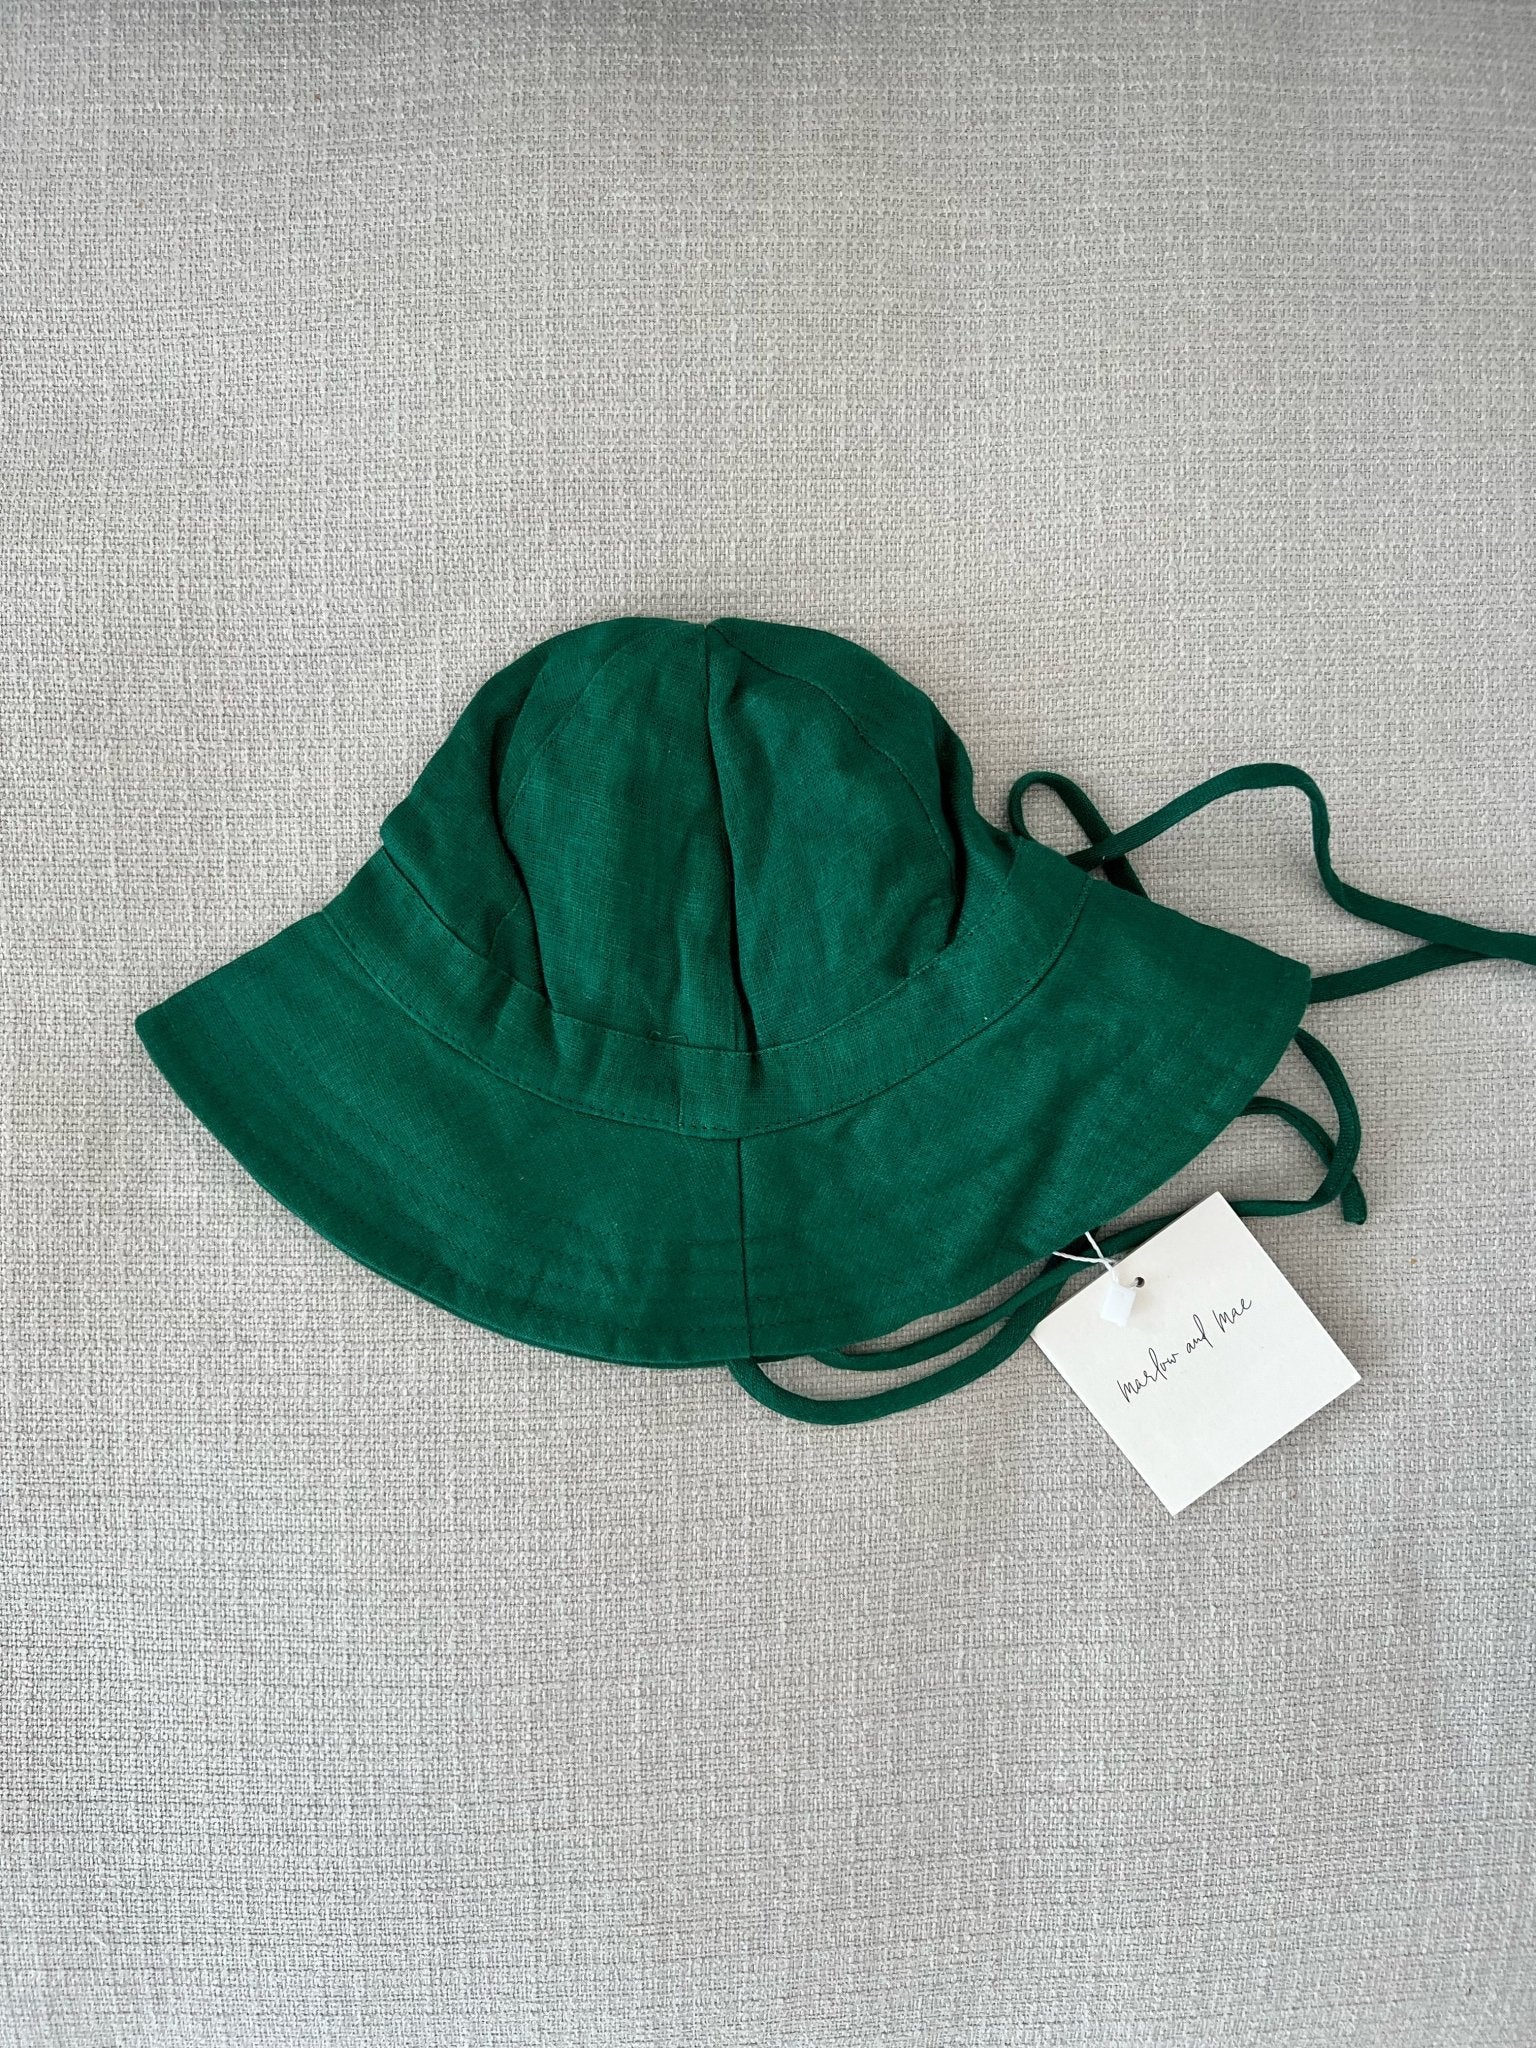 Baby Hat - Green - 100% Stonewashed Linen